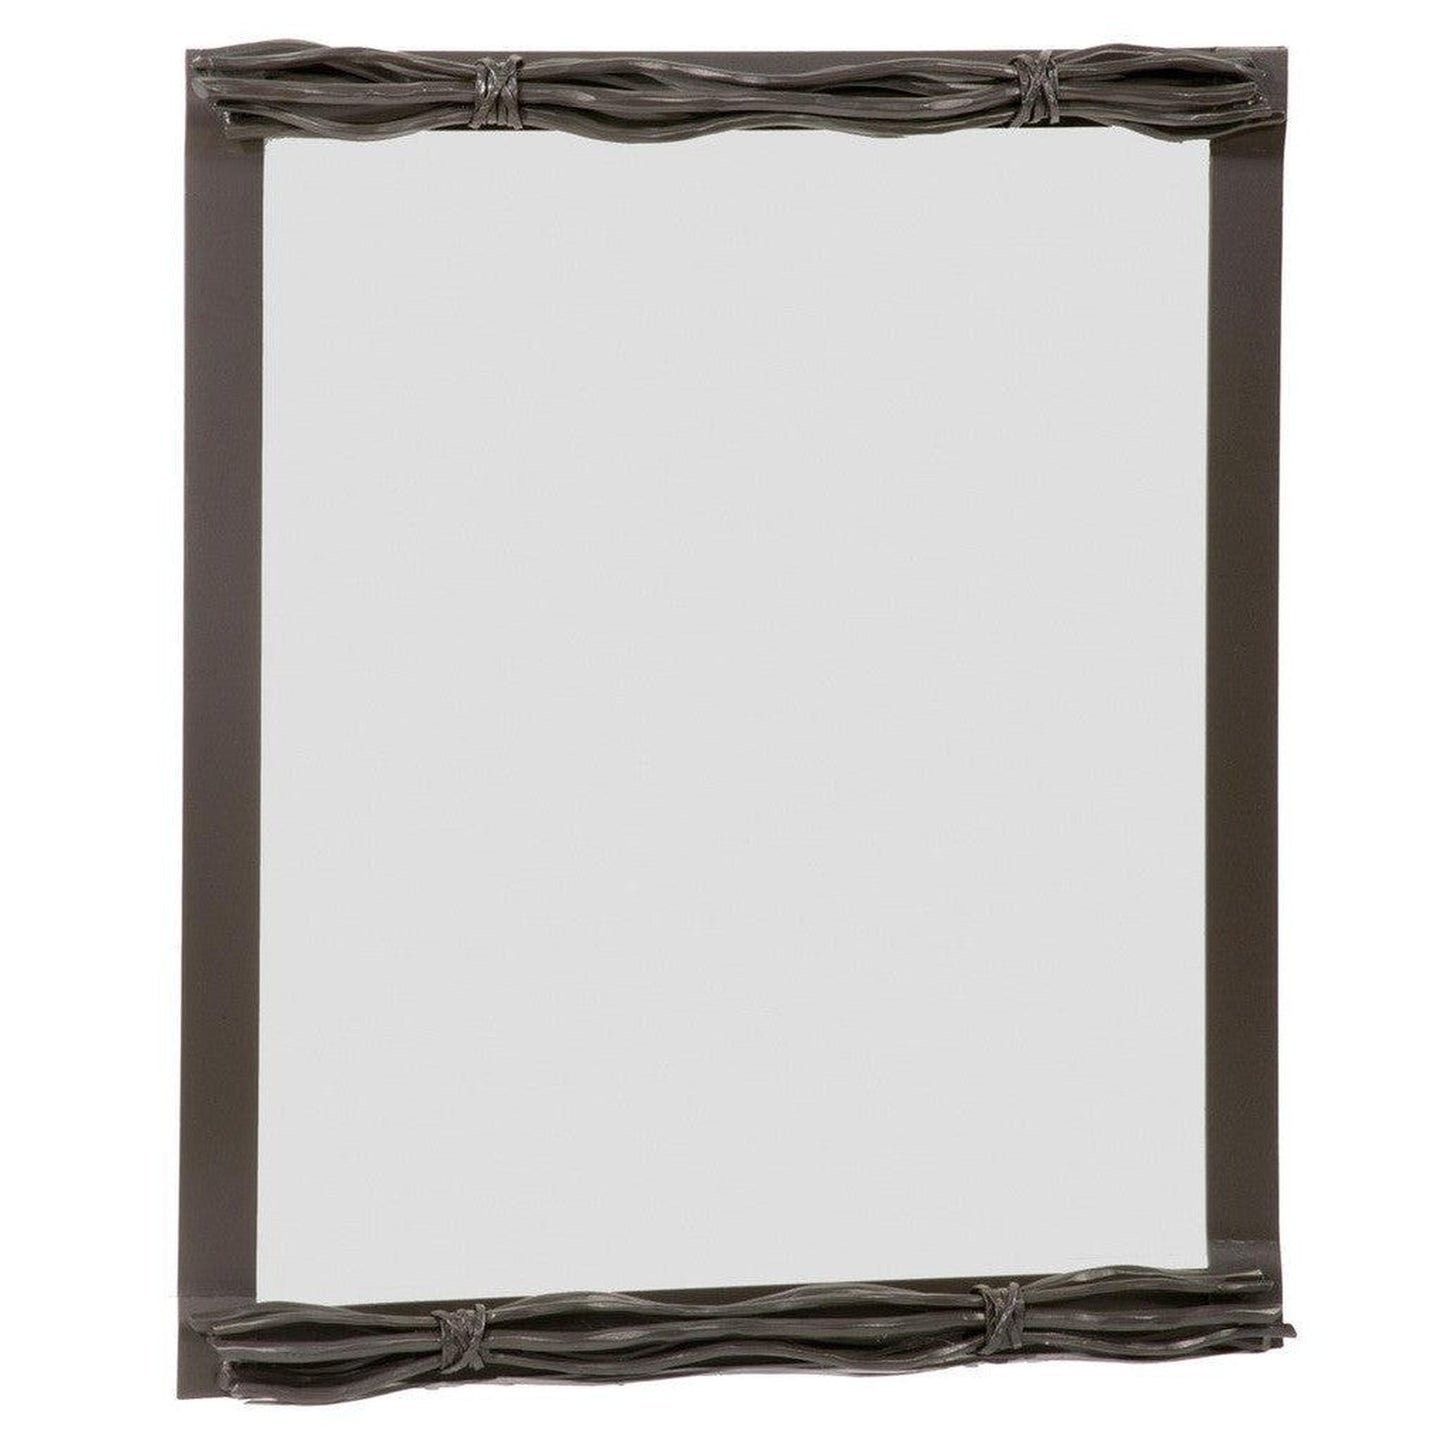 Stone County Ironworks Rush 21" x 26" Small Hand Rubbed Ivory Iron Wall Mirror